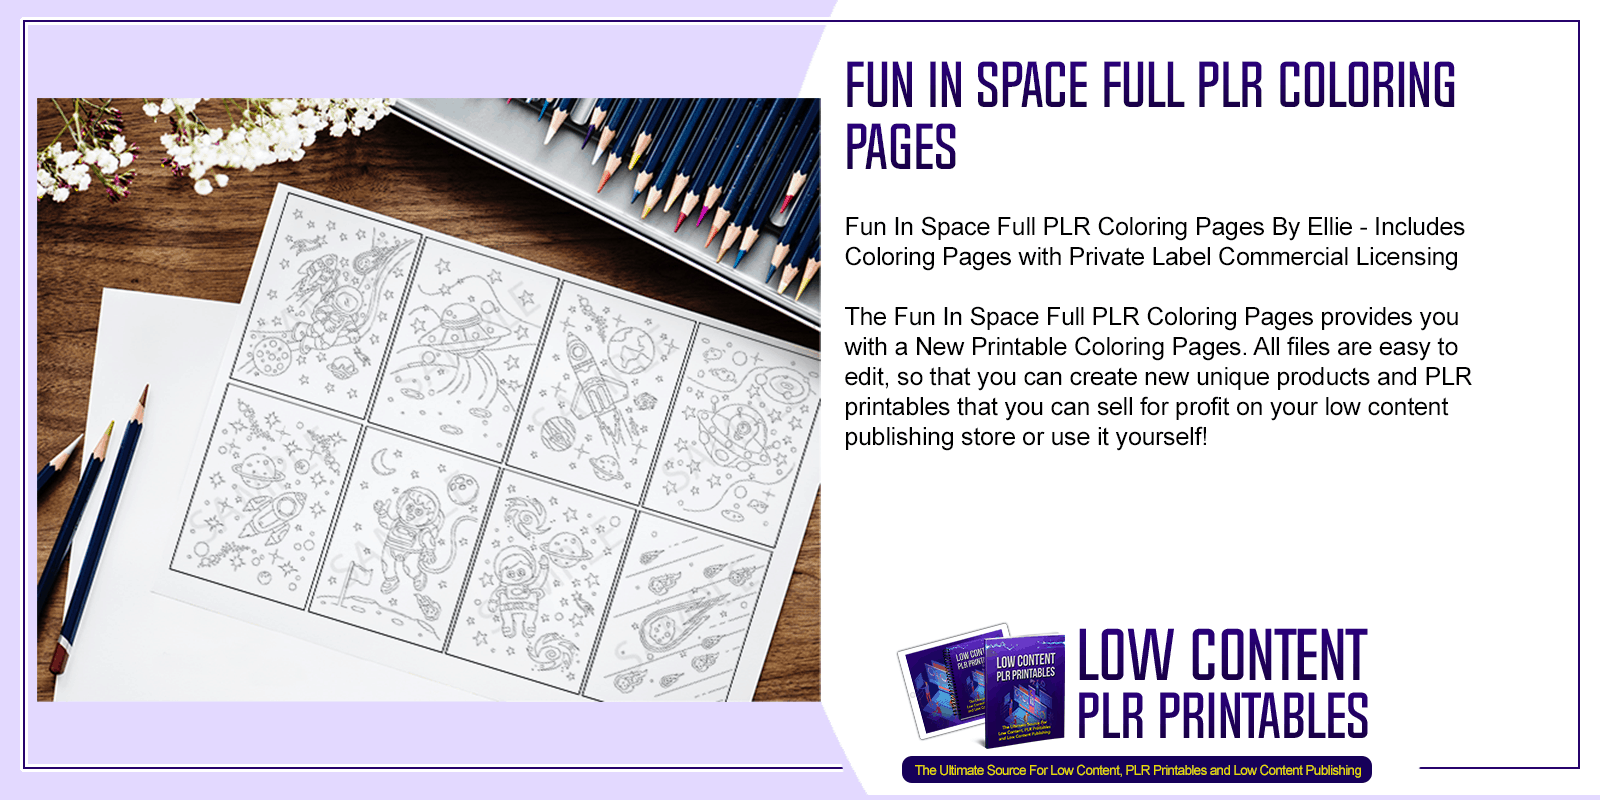 Fun In Space Full PLR Coloring Pages